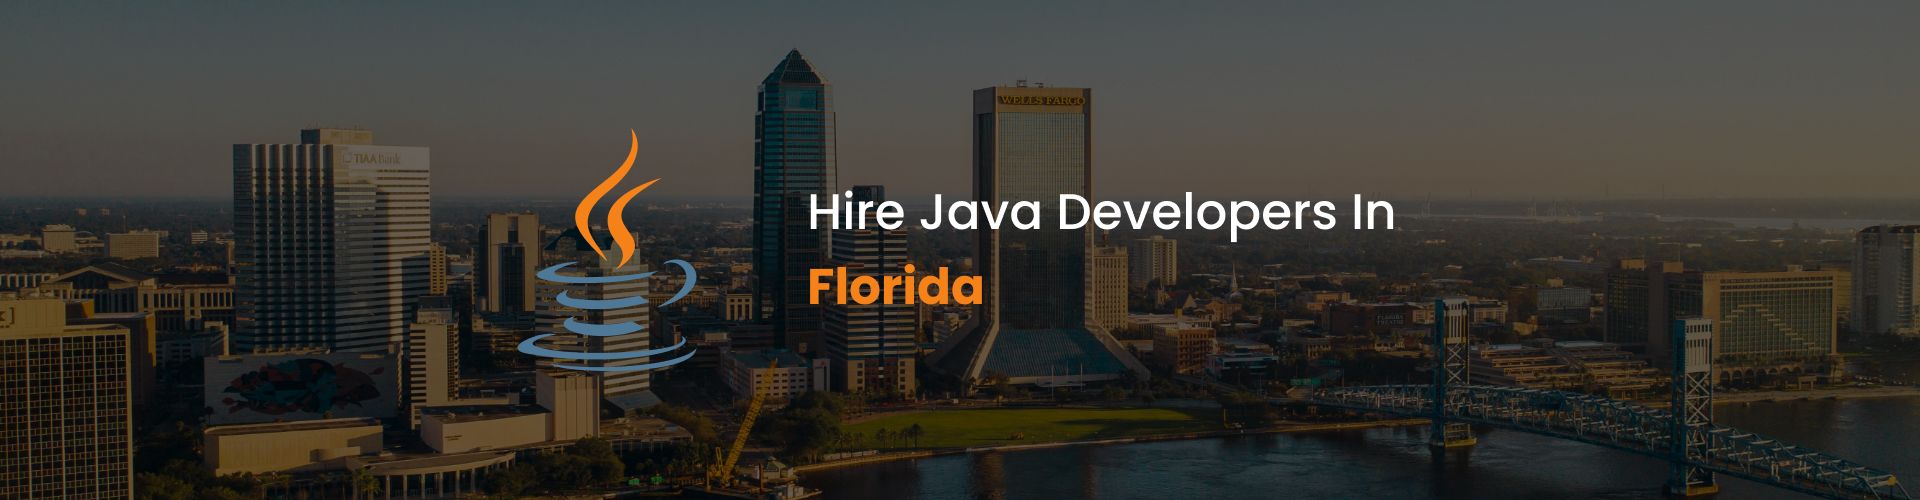 hire java developers in florida